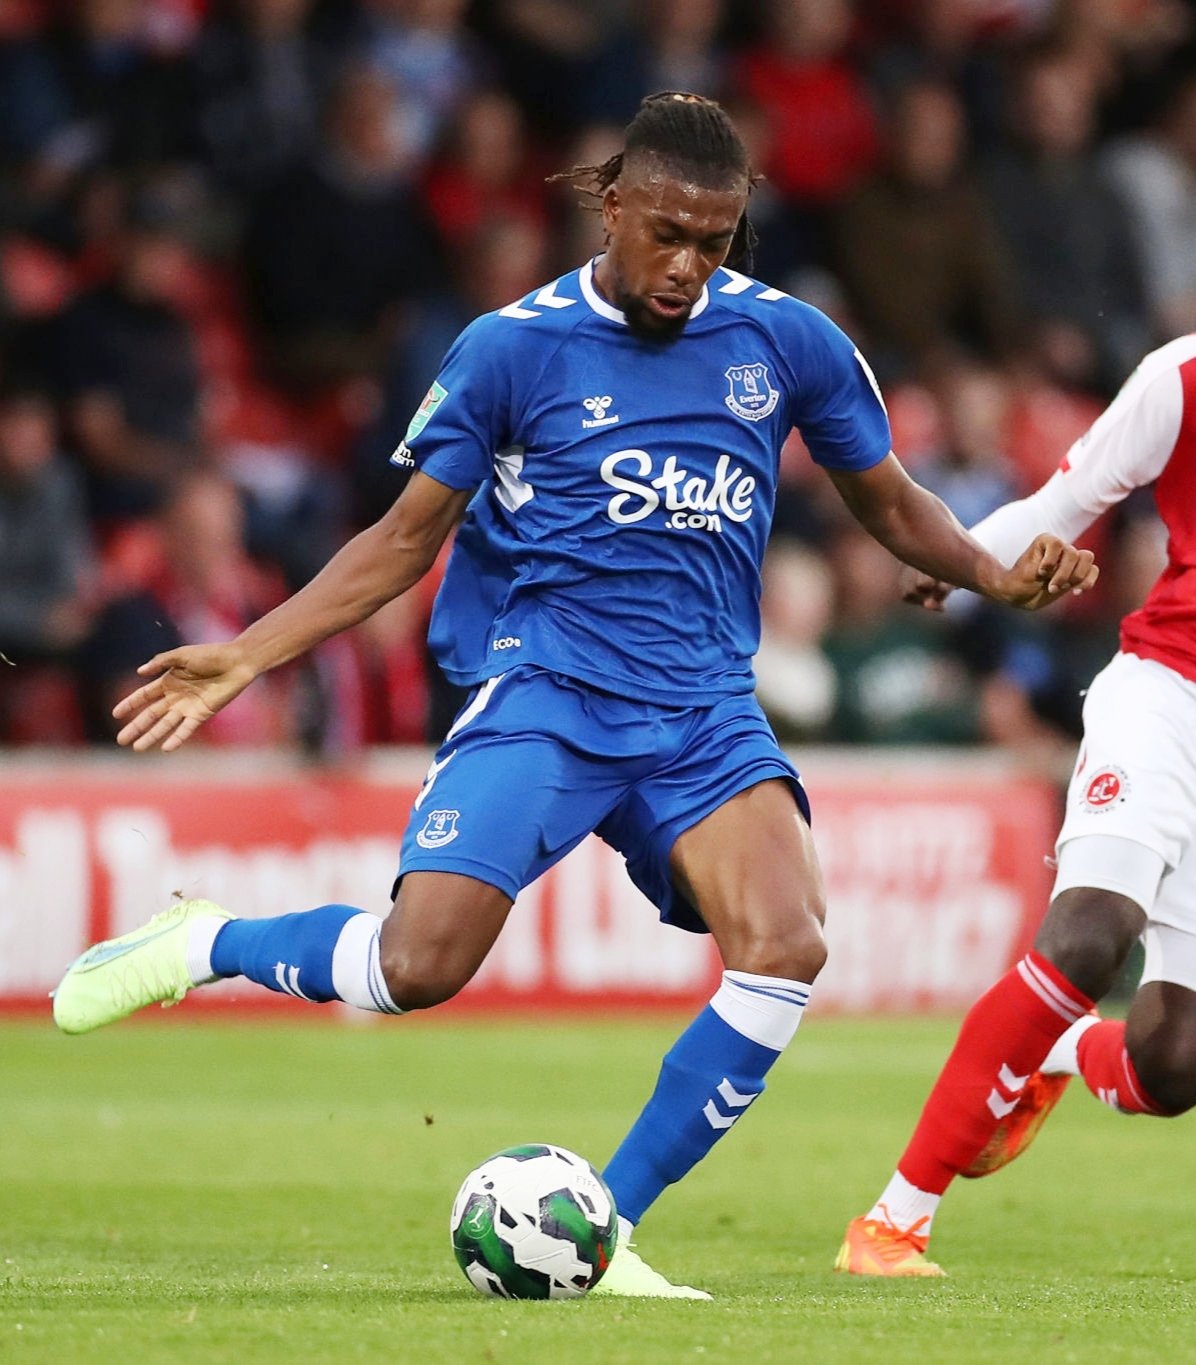 Iwobi Targets First EPL Win Of The Season As Everton Clash With Onyeka’s Brentford